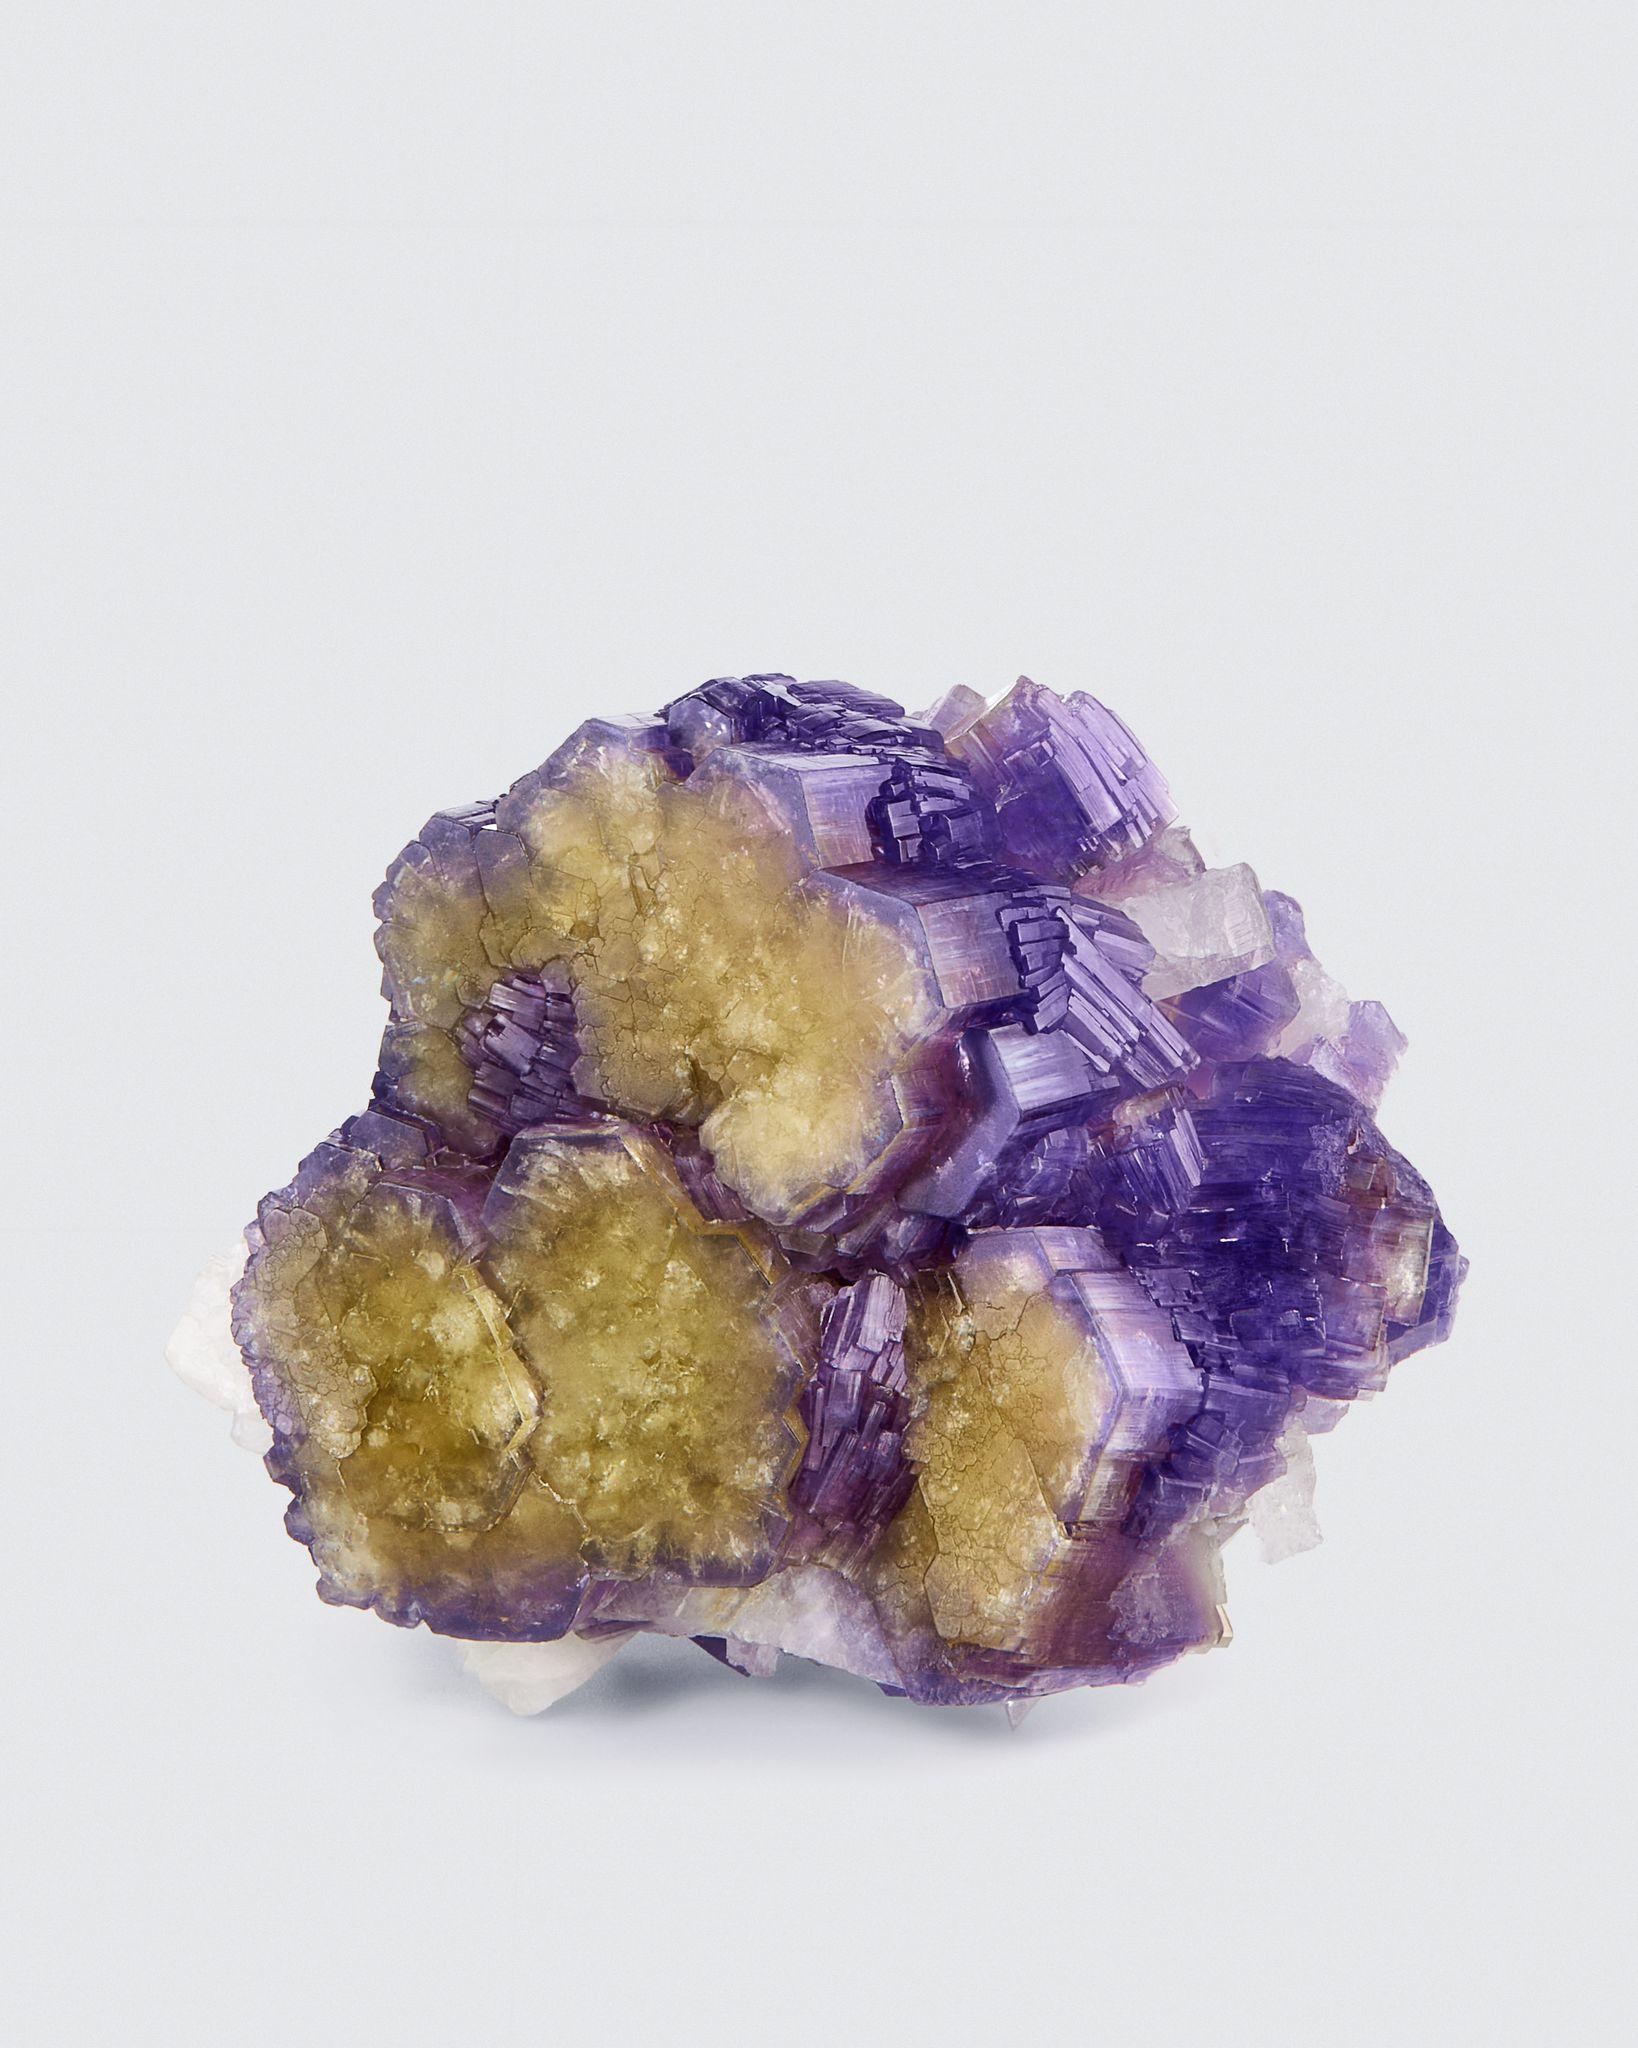 Fluorapatite (bi-color) with Cleavelandite, Dara-e-Pech pegmatite field, Dara-e-Pech District, Kunar, Afghanistan
6 cm tall x 7 cm wide

Fluorapatite is found in several colors, purple being the most sought after. This specimen from a remote and